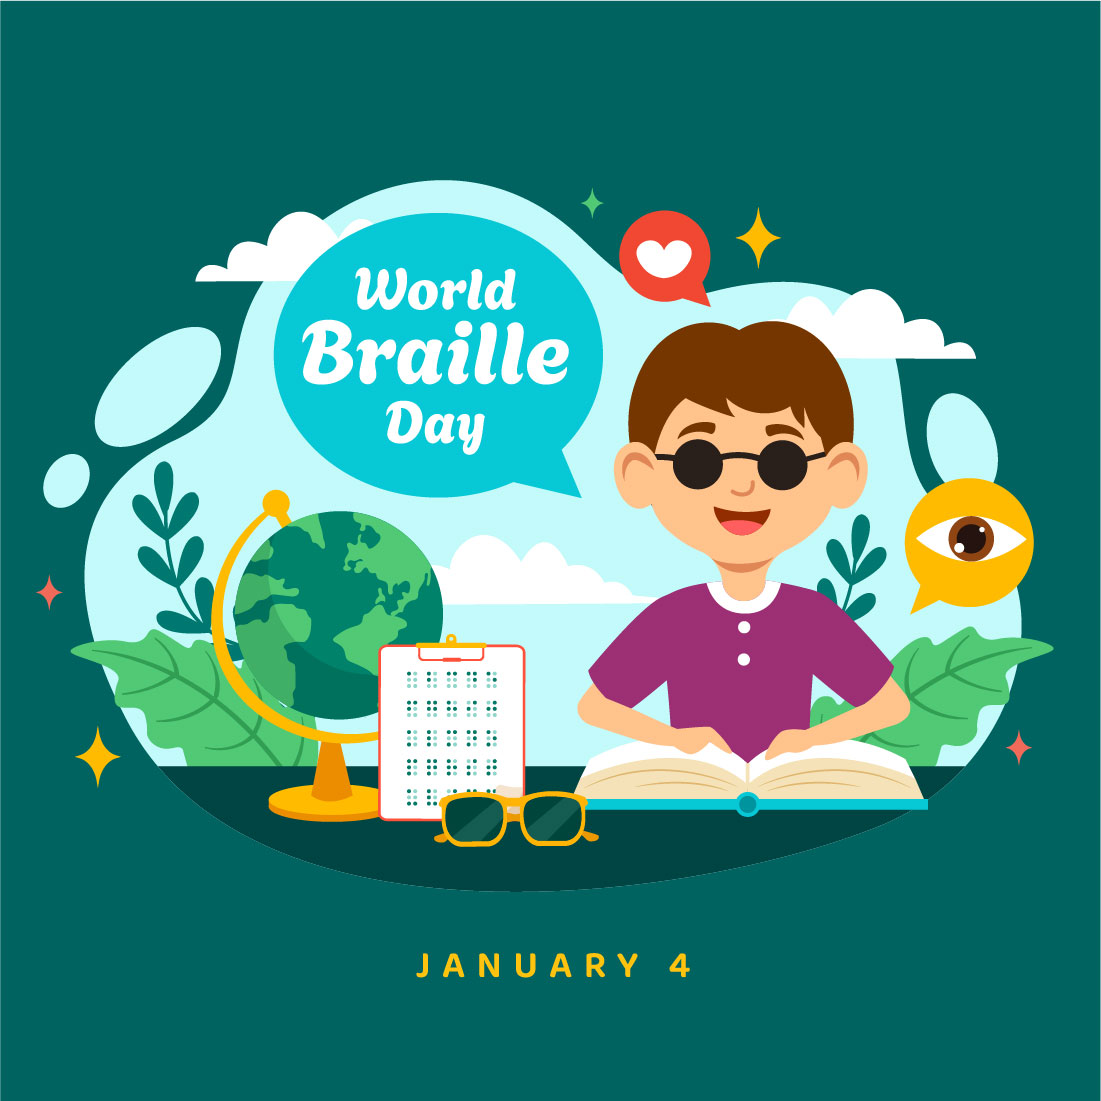 12 World Braille Day Illustration cover image.